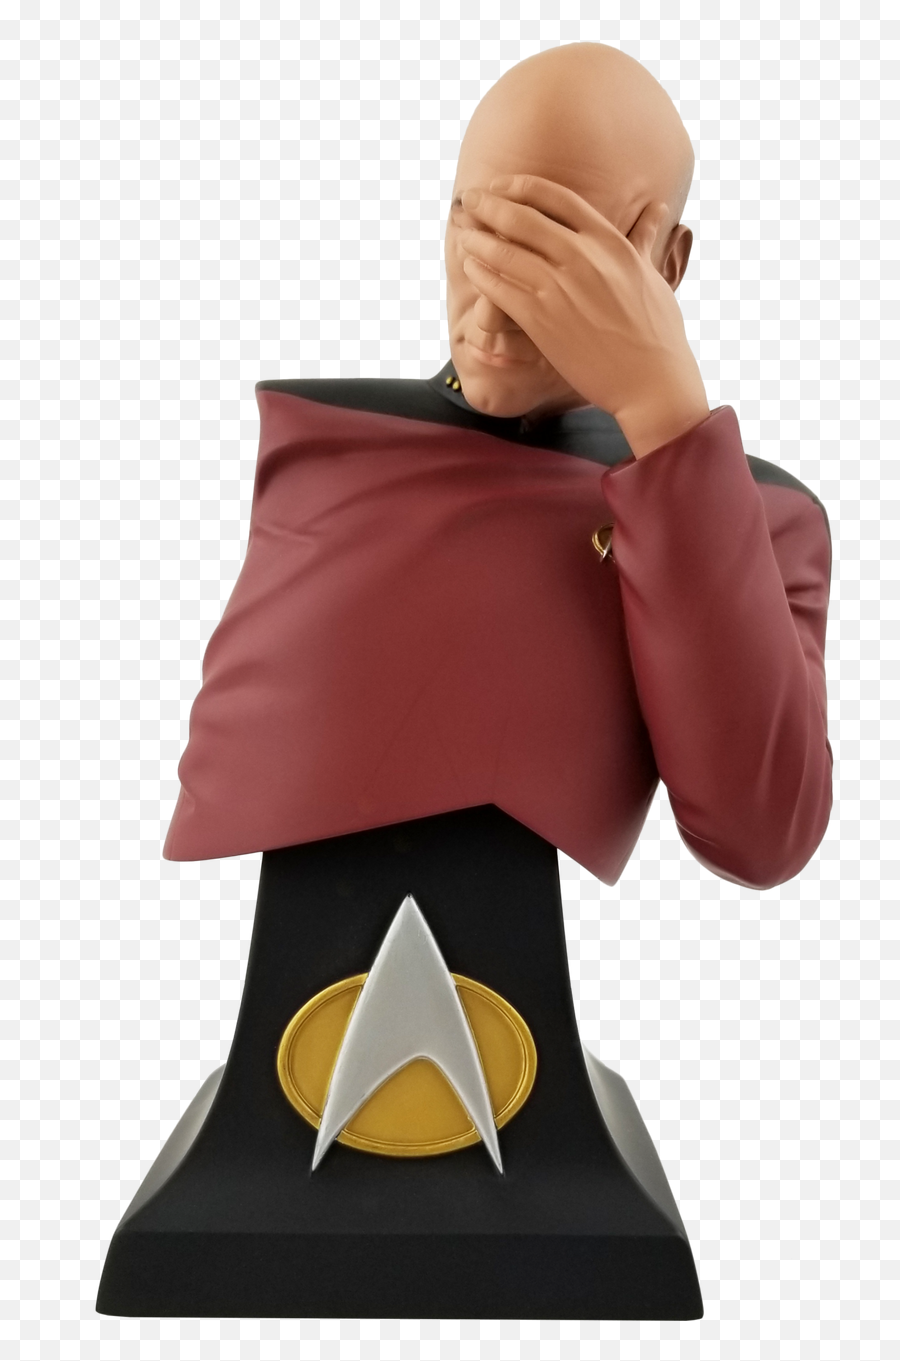 Star Trek The Next Generation Picard Facepalm Limited Edition Bust - San Diego Comiccon 2020 Previews Exclusive Emoji,Star Trek Next Generation Logo